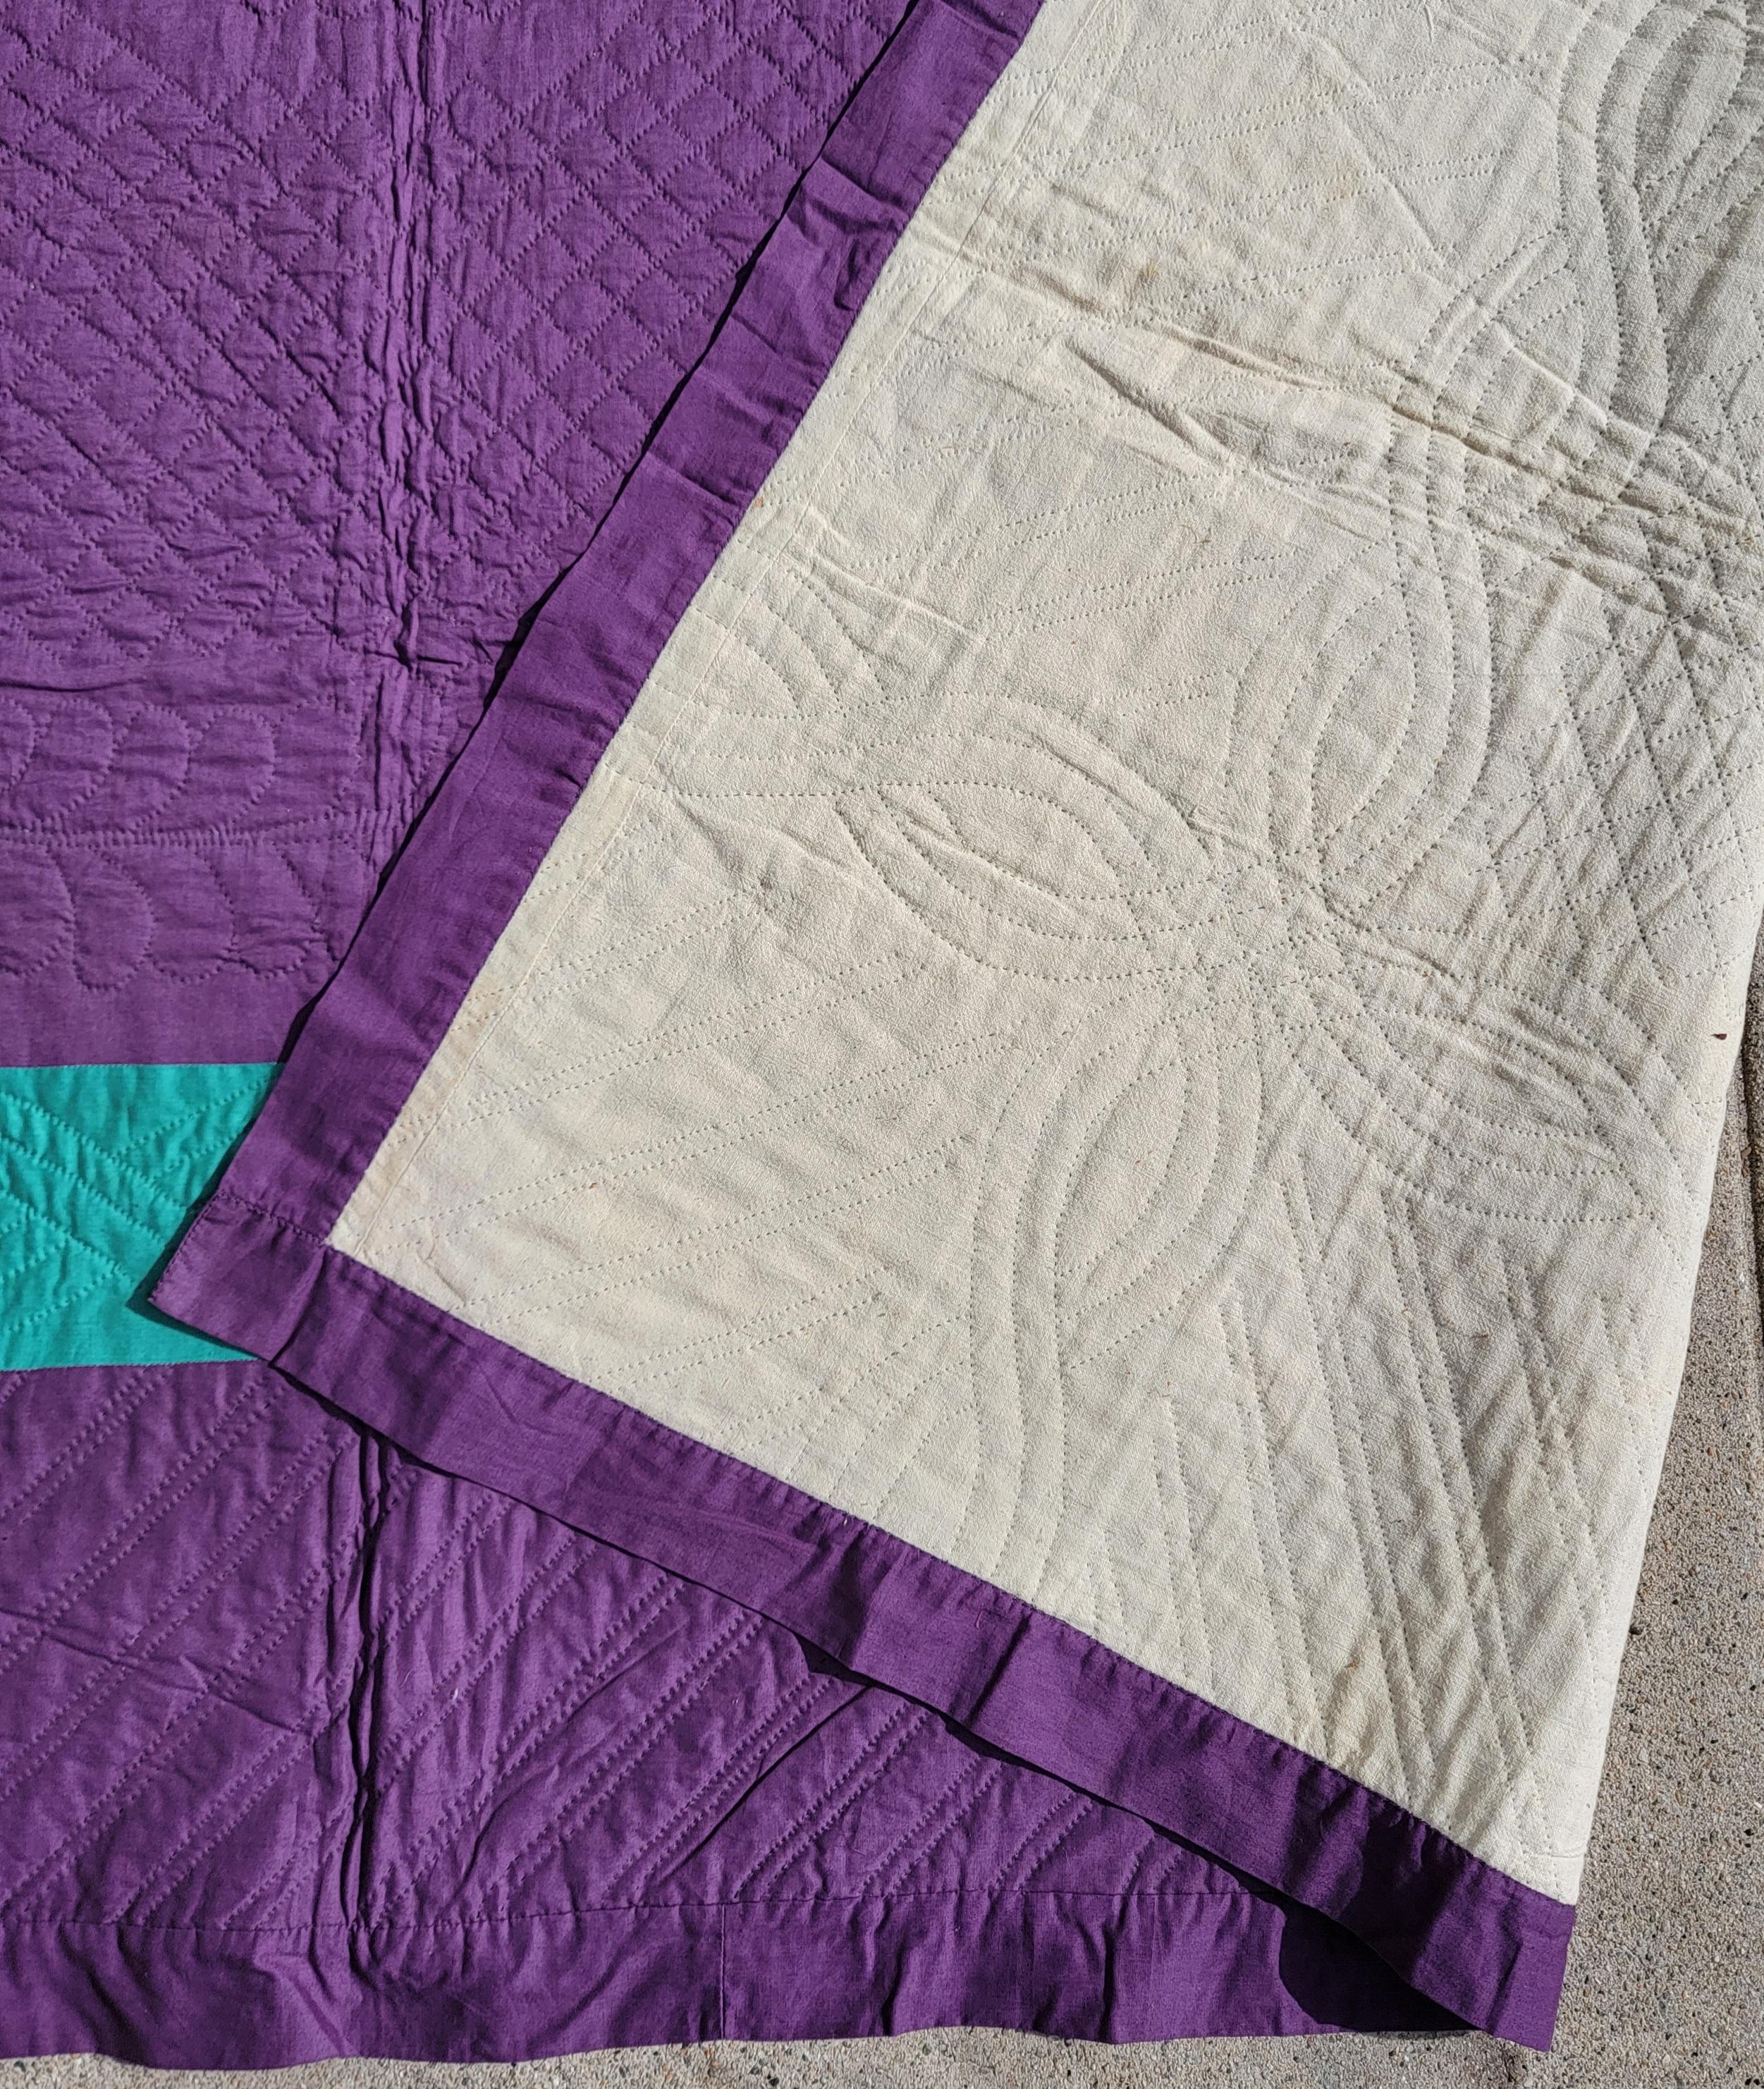 Hand-Crafted Early 20th C Ohio Amish Plain Quilt For Sale